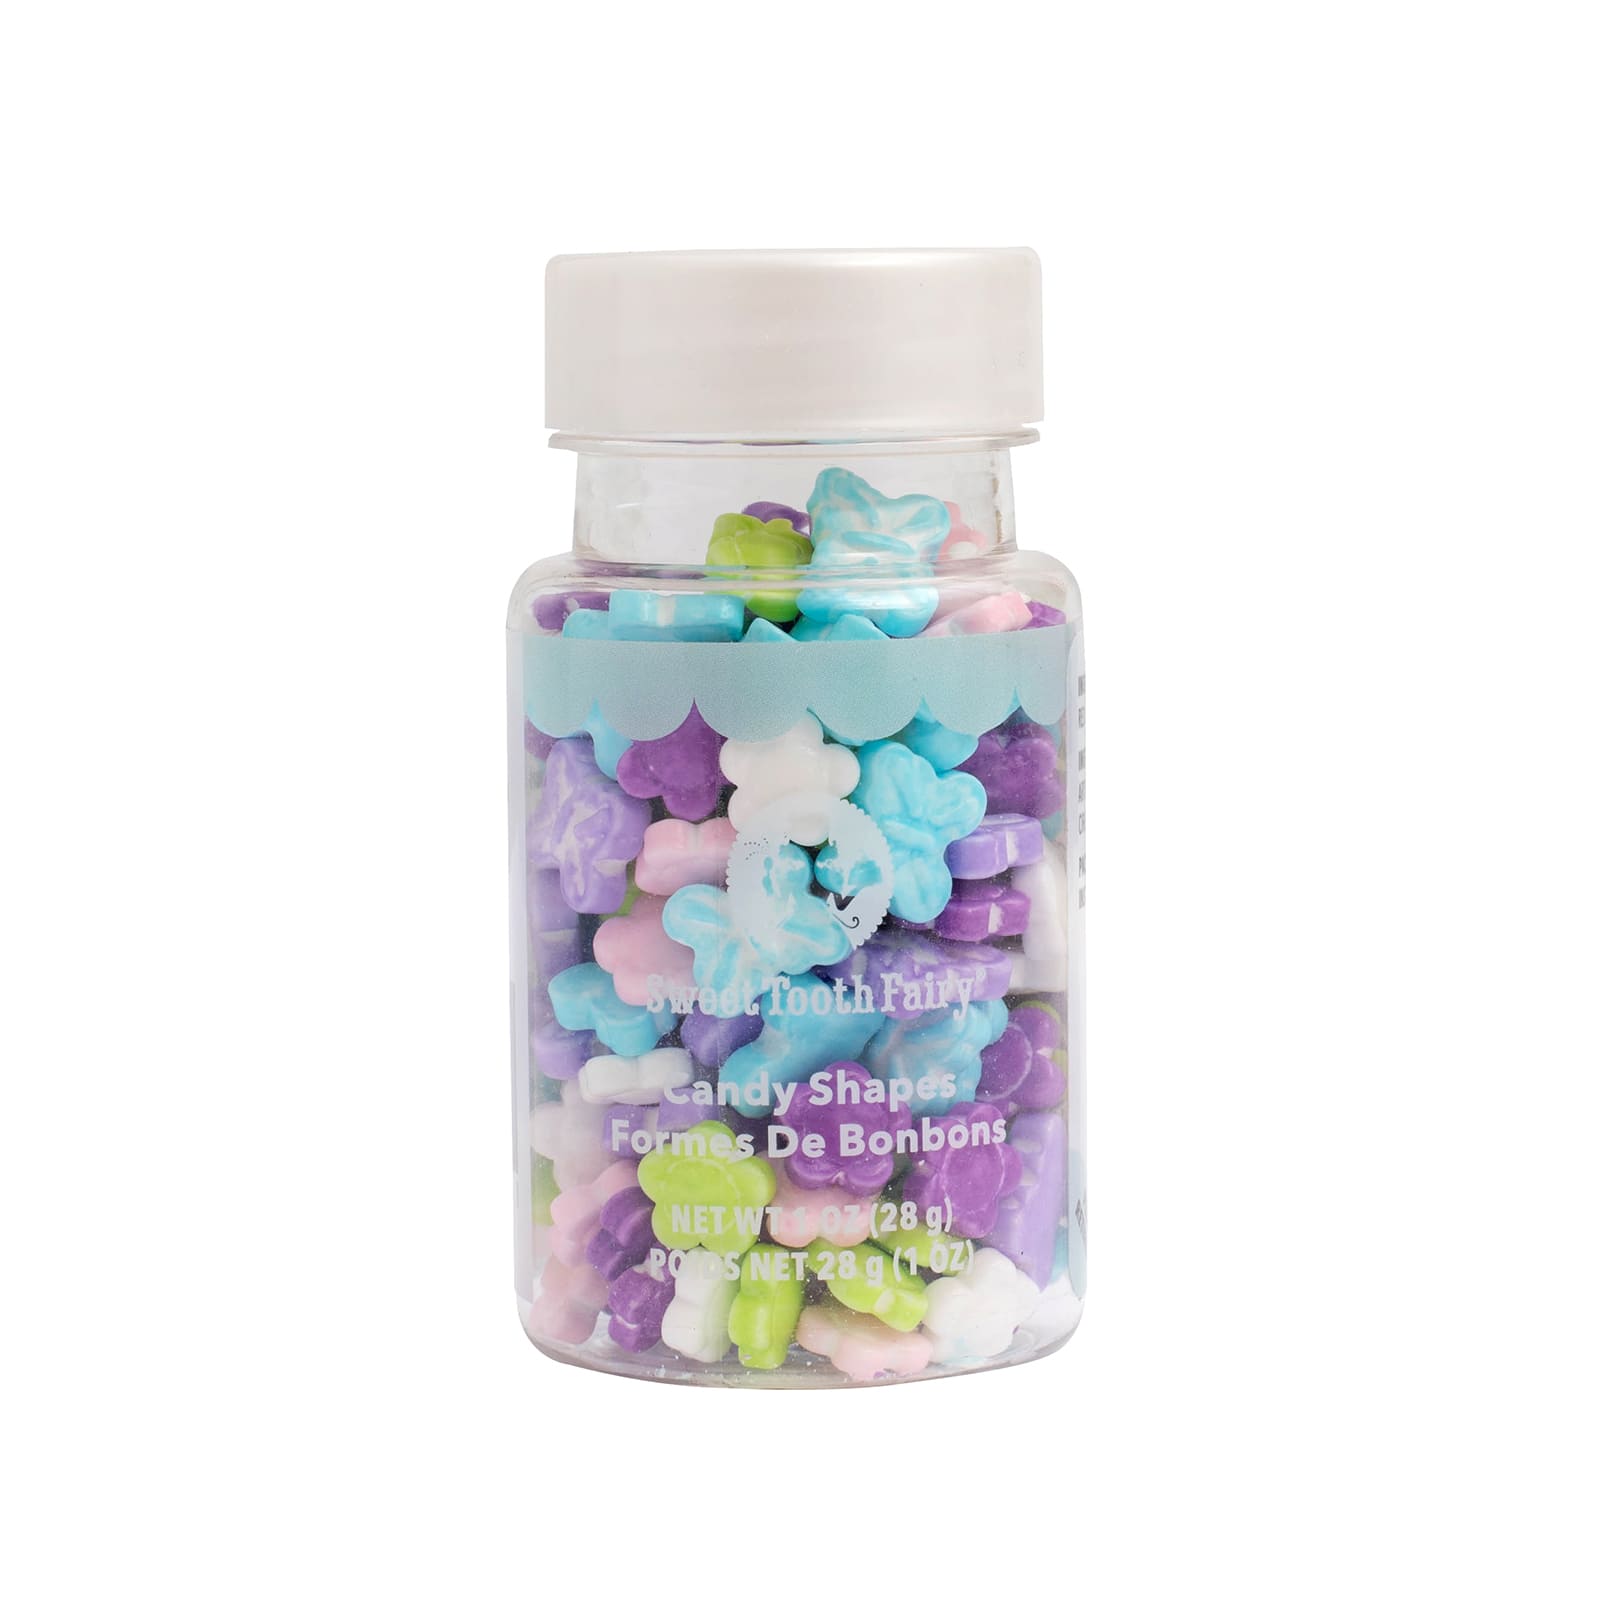 Sweet Tooth Fairy® Flower Medley Candy Shapes